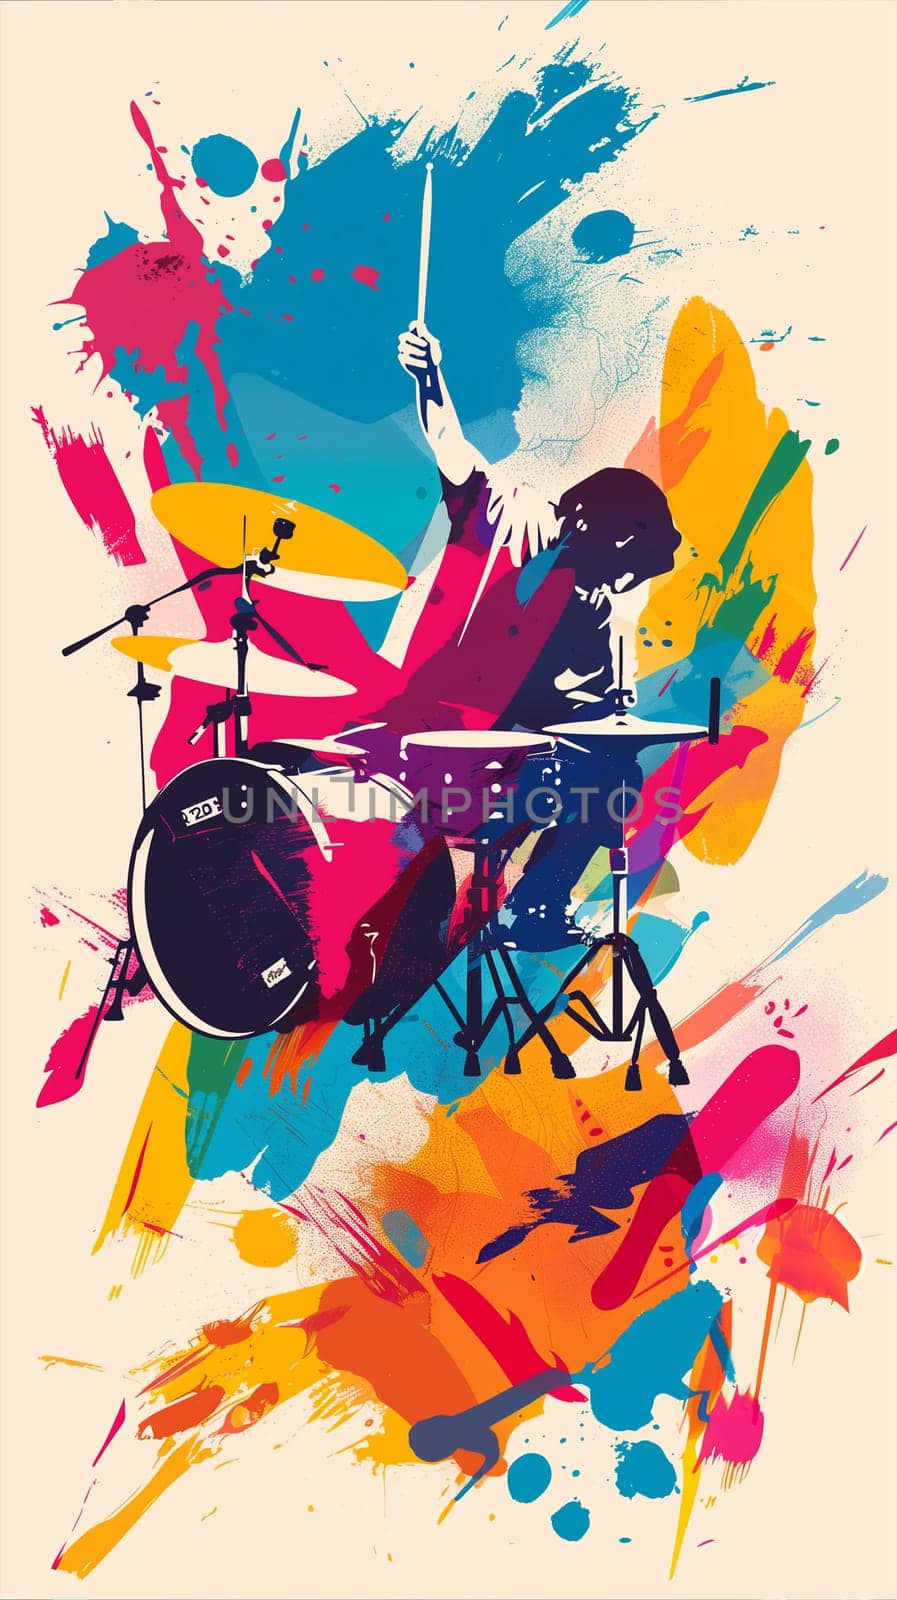 A drummer energetically playing drums while vibrant paint splatters cover the drums and the drummer, adding a dynamic and colorful element to the performance.